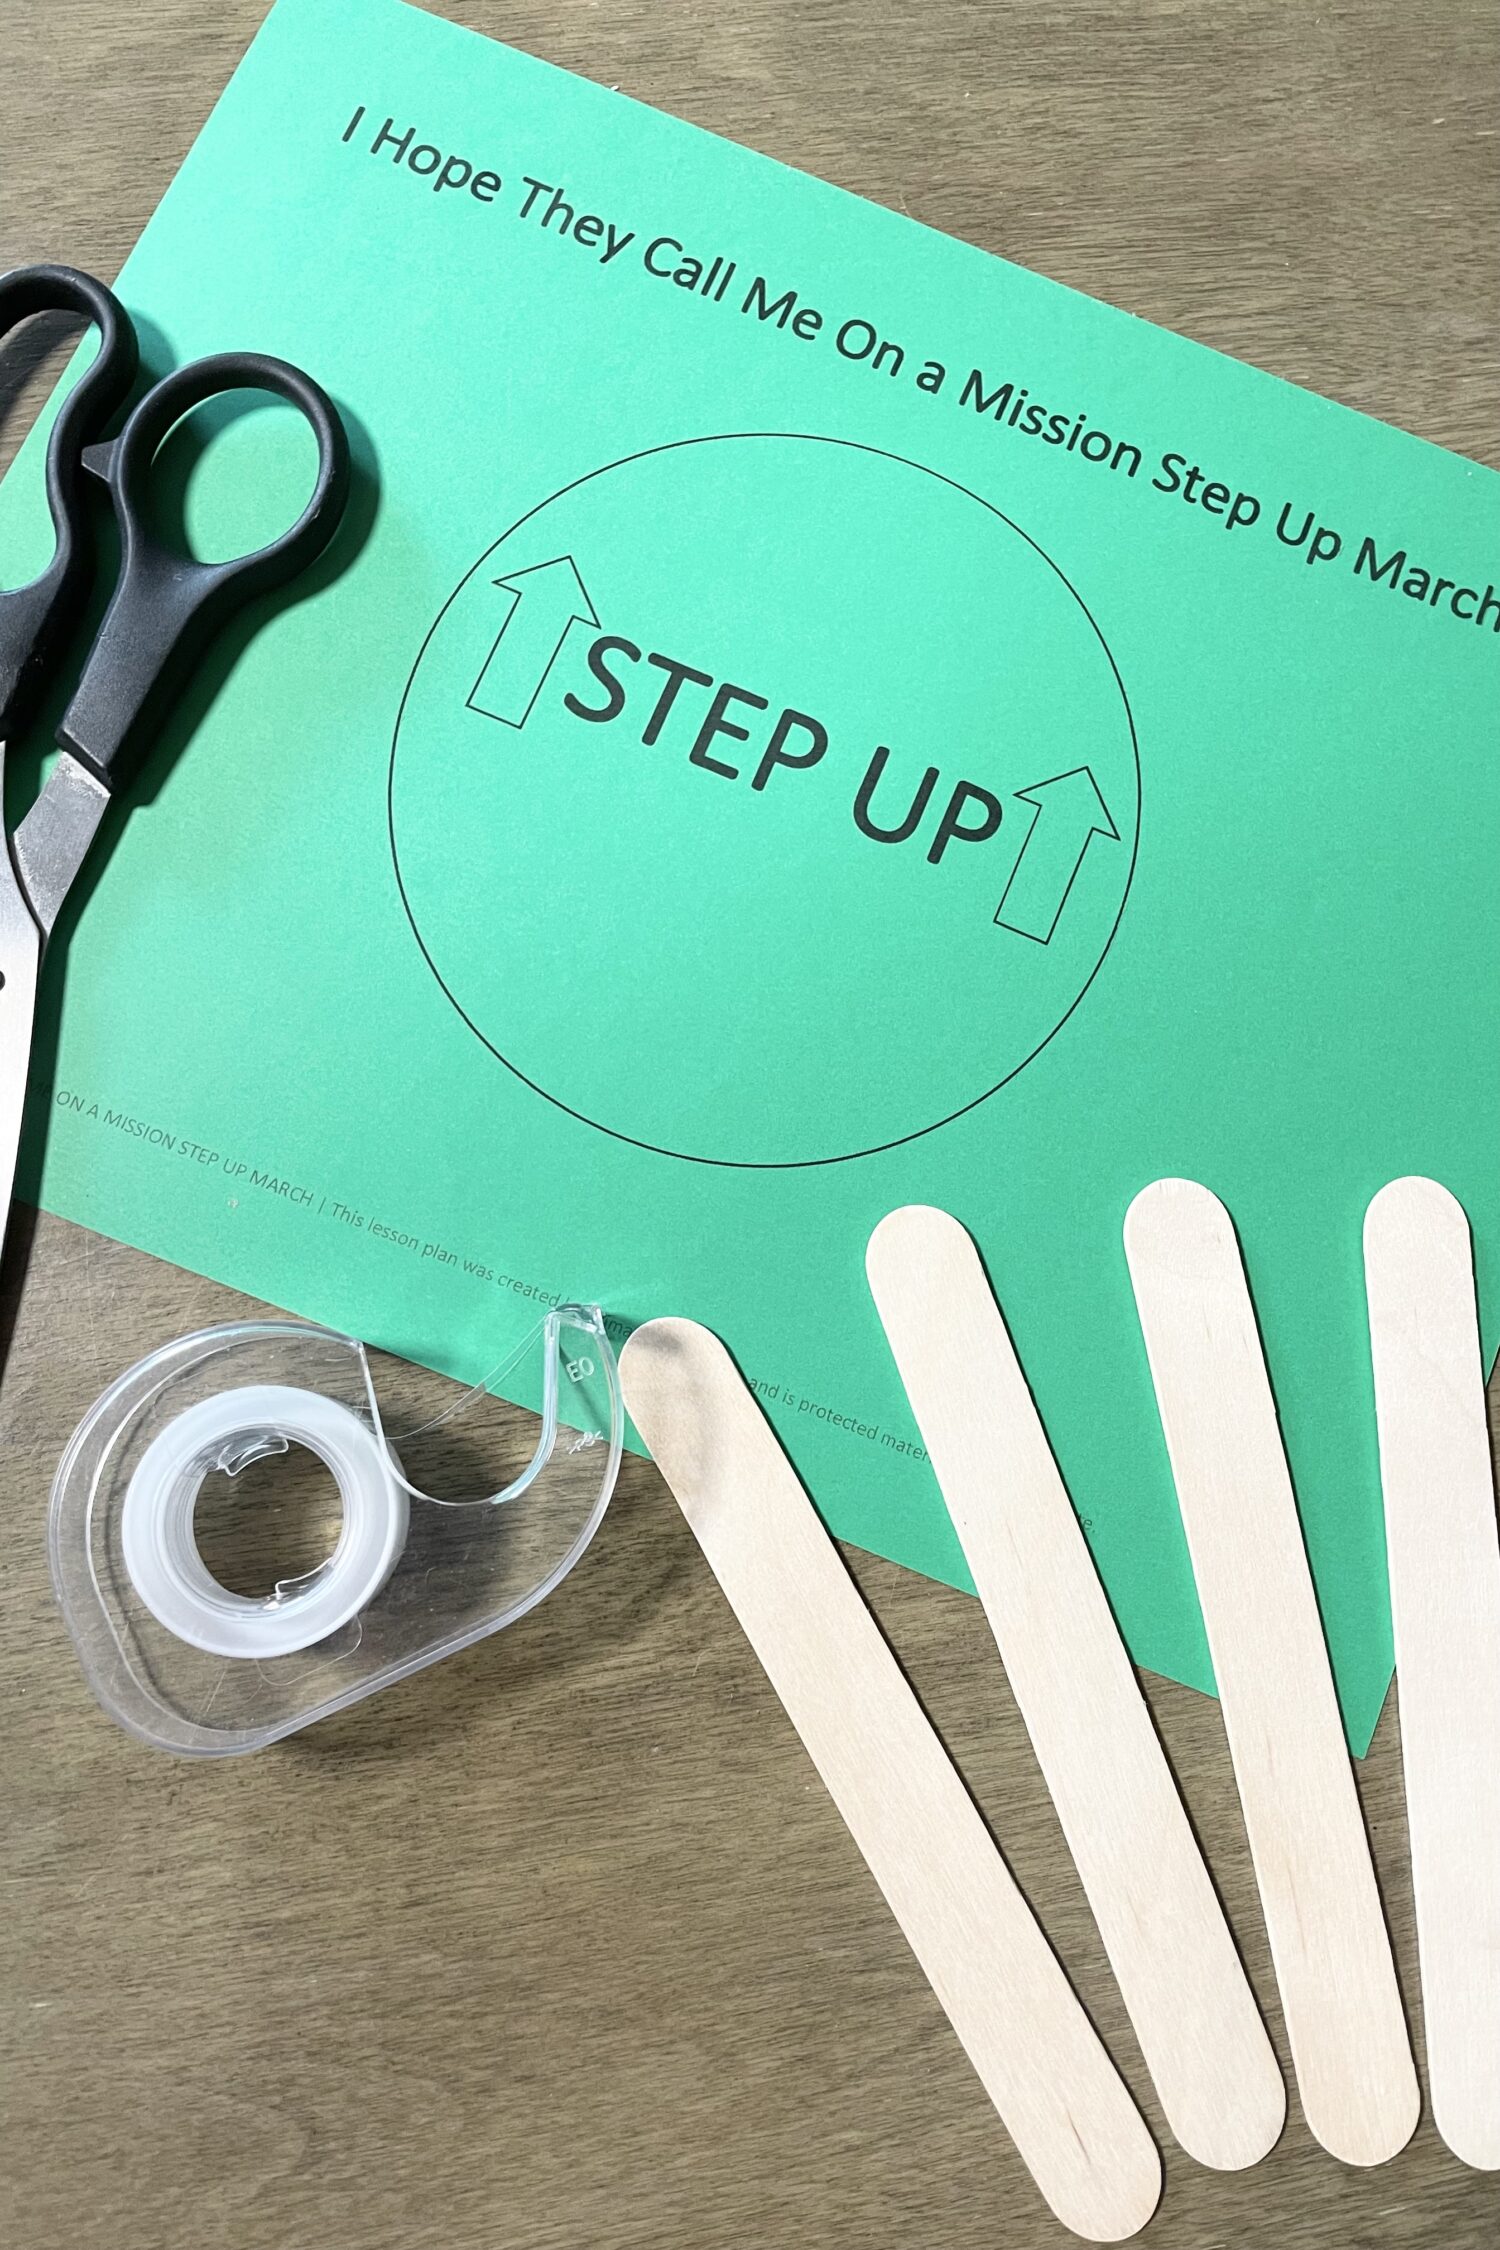 I Hope They Call Me on a Mission Step Up March singing time idea for LDS Primary music leaders - a fun movement activity and way to teach this song!